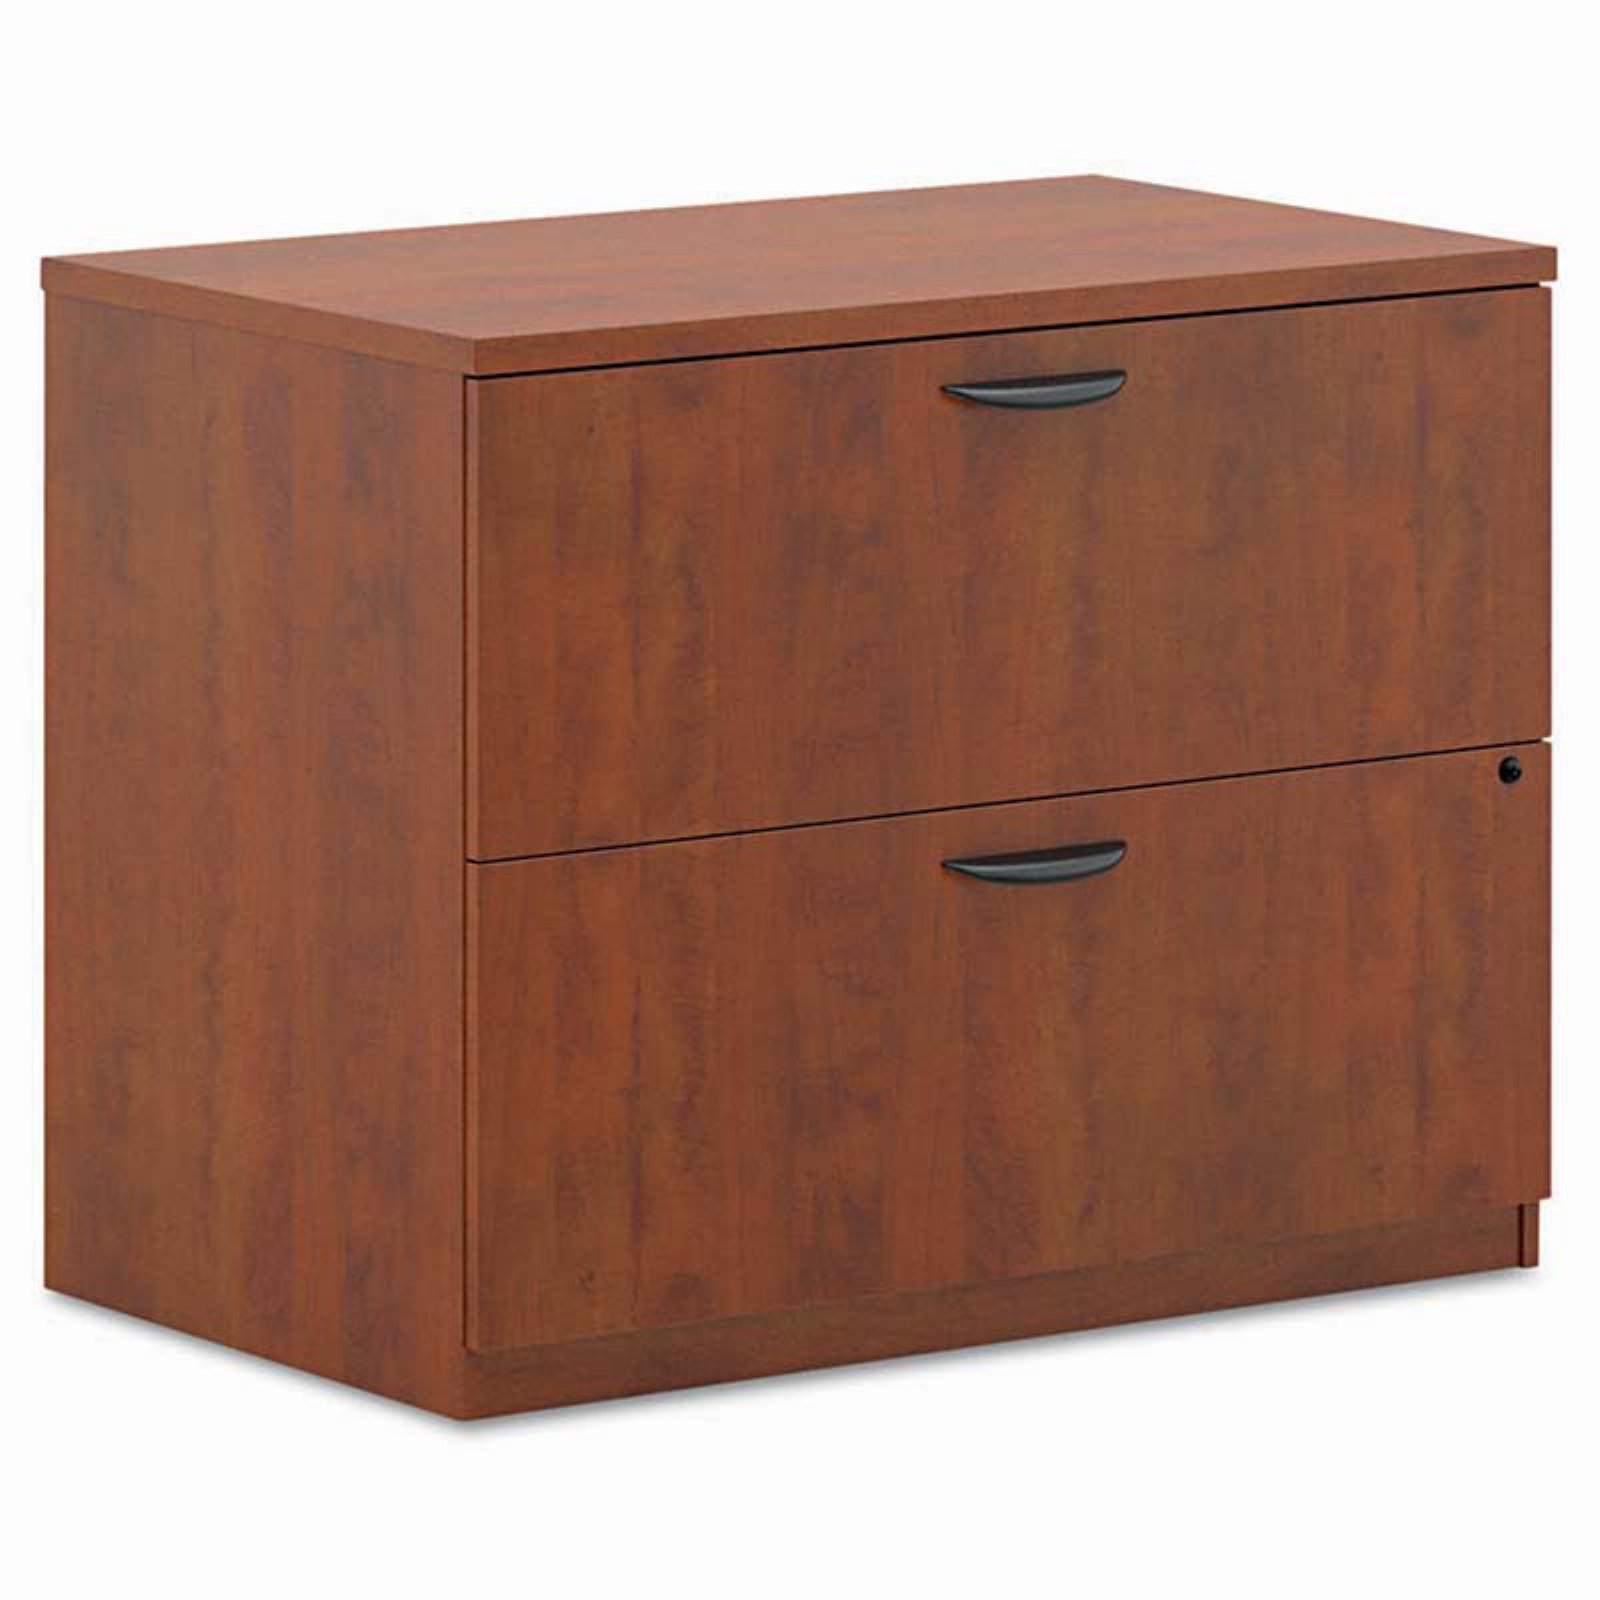 Basyx 2 Drawers Lateral Lockable Filing Cabinet, Cherry - image 2 of 2